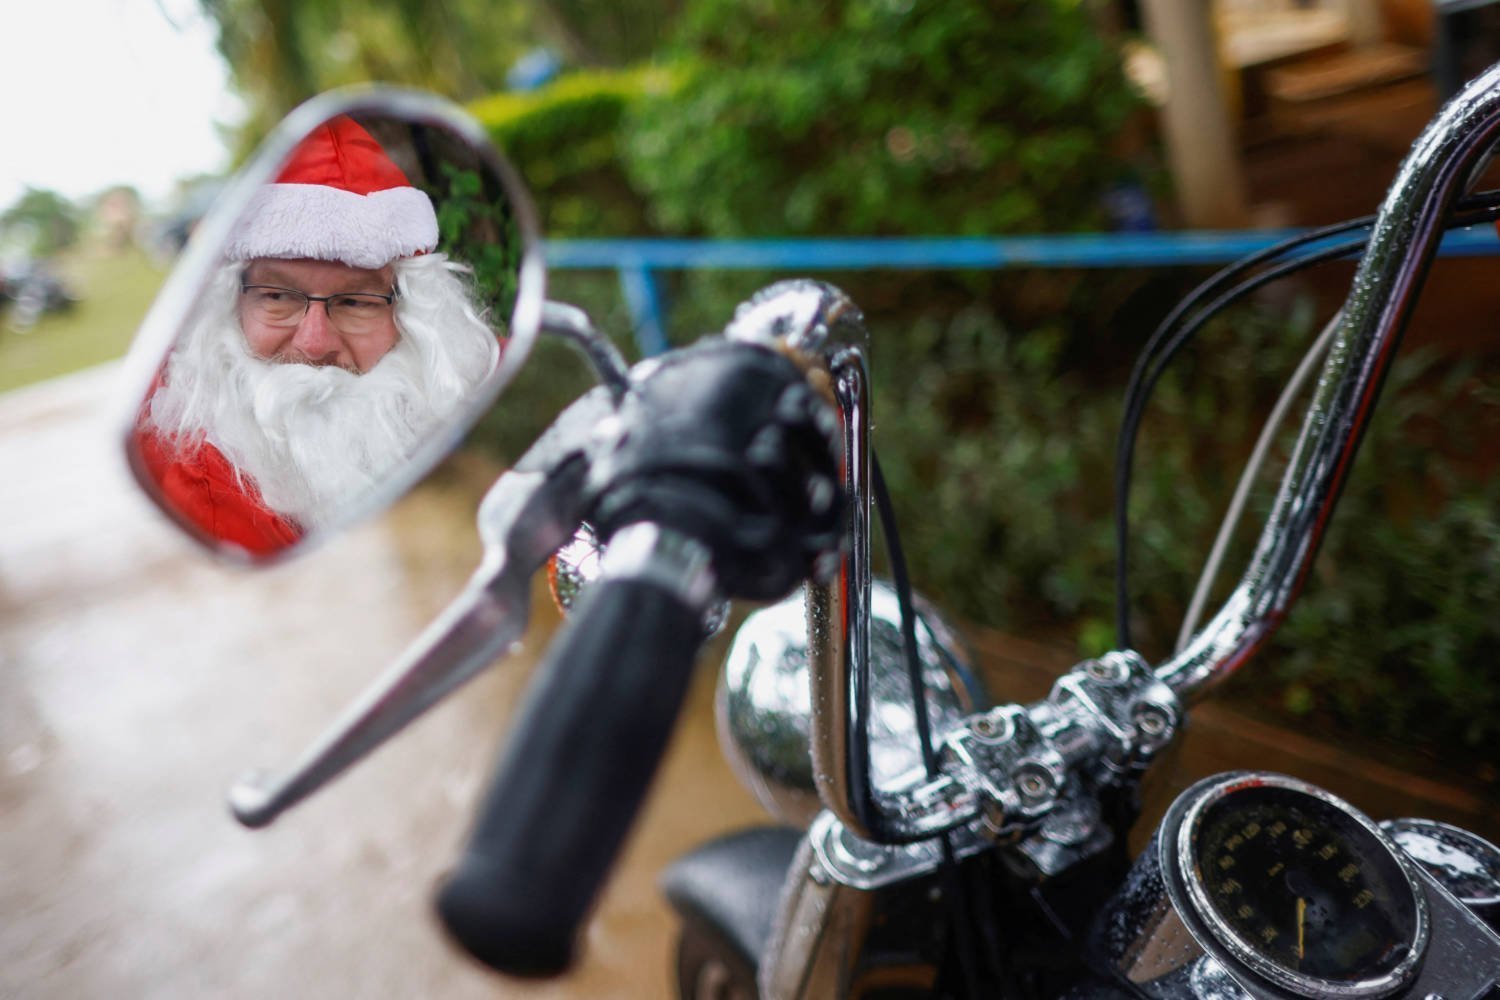 Helton Garcia Dressed As santa claus rides On A motorcycle before Distributing Small Presents To Children In A Rural School In Santo Antonio Do Descoberto, State Of Goias